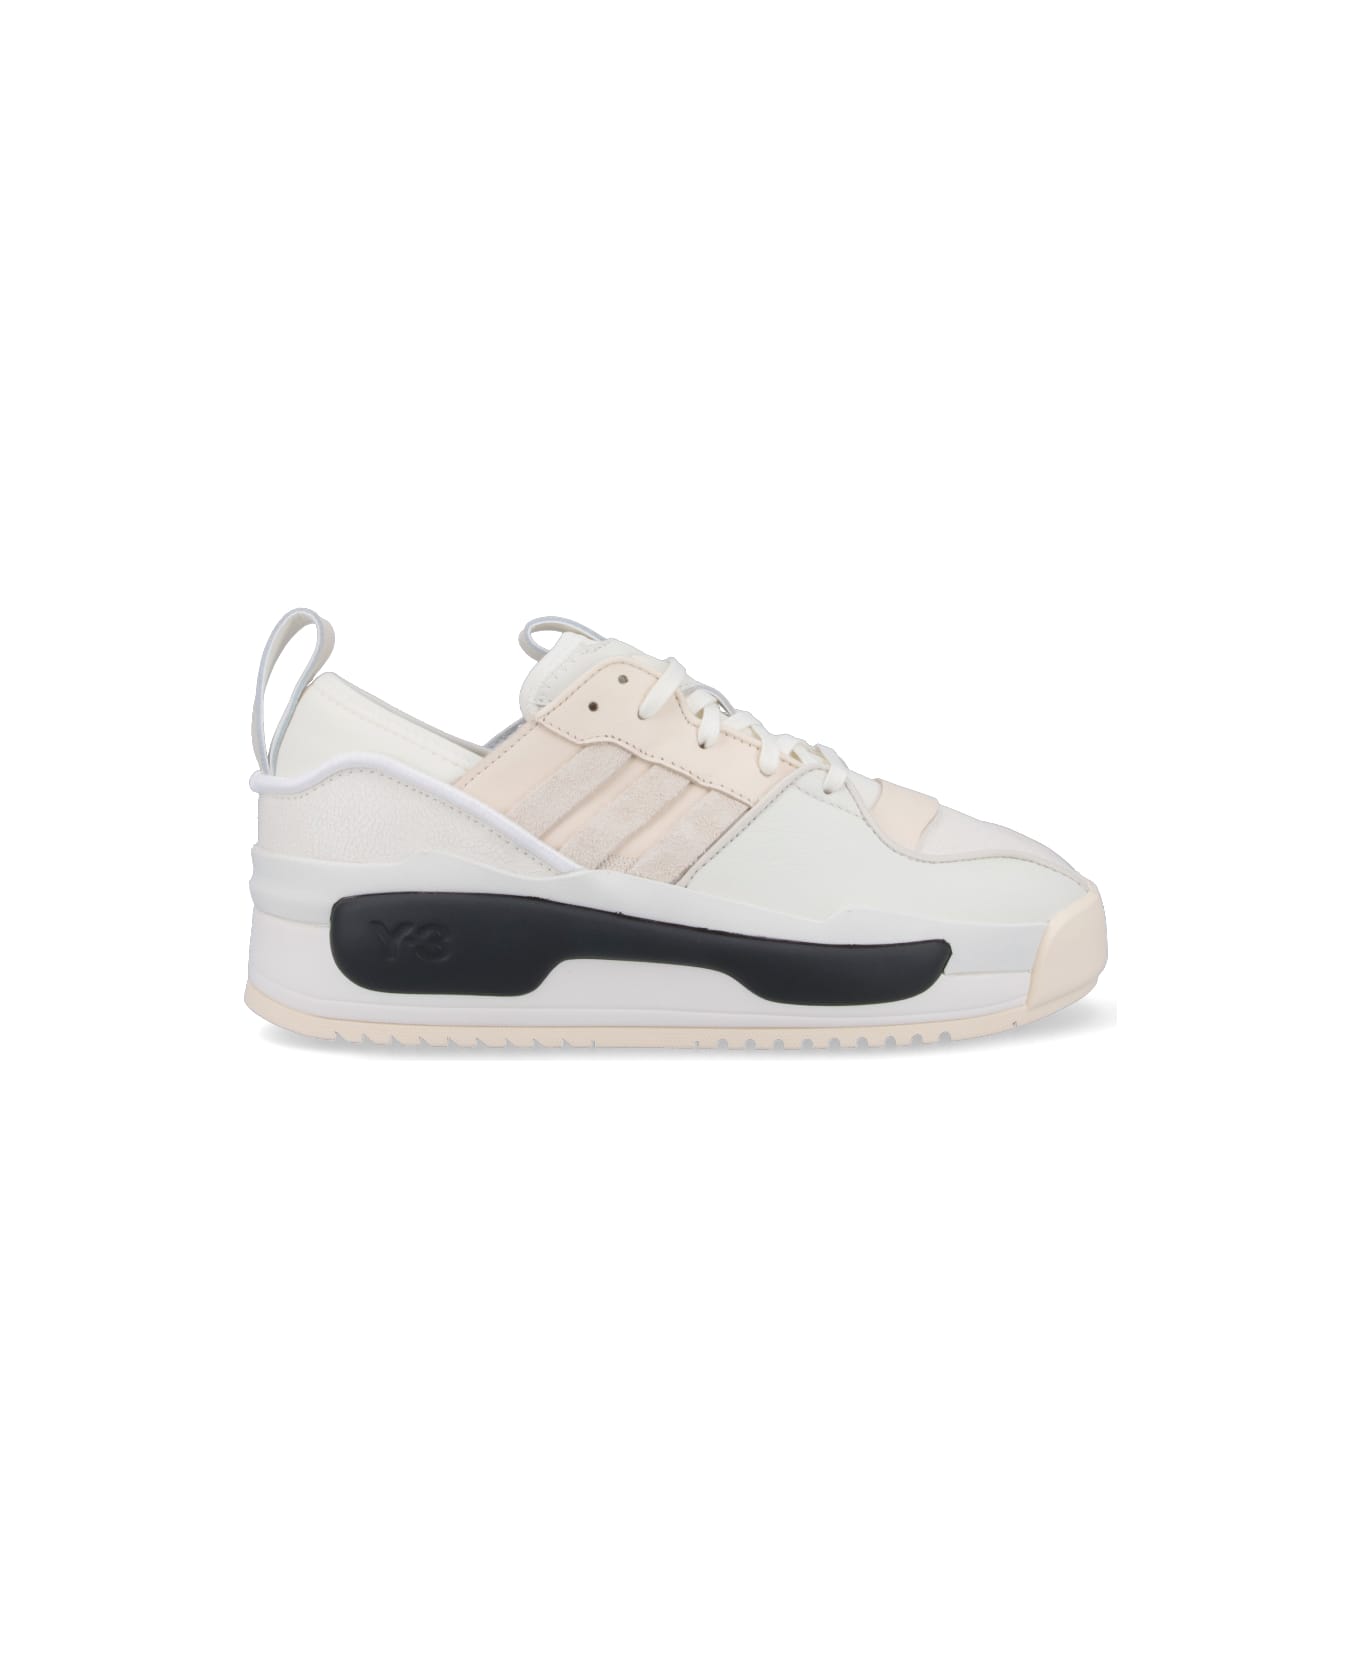 Y-3 'rivarly' Sneakers - White